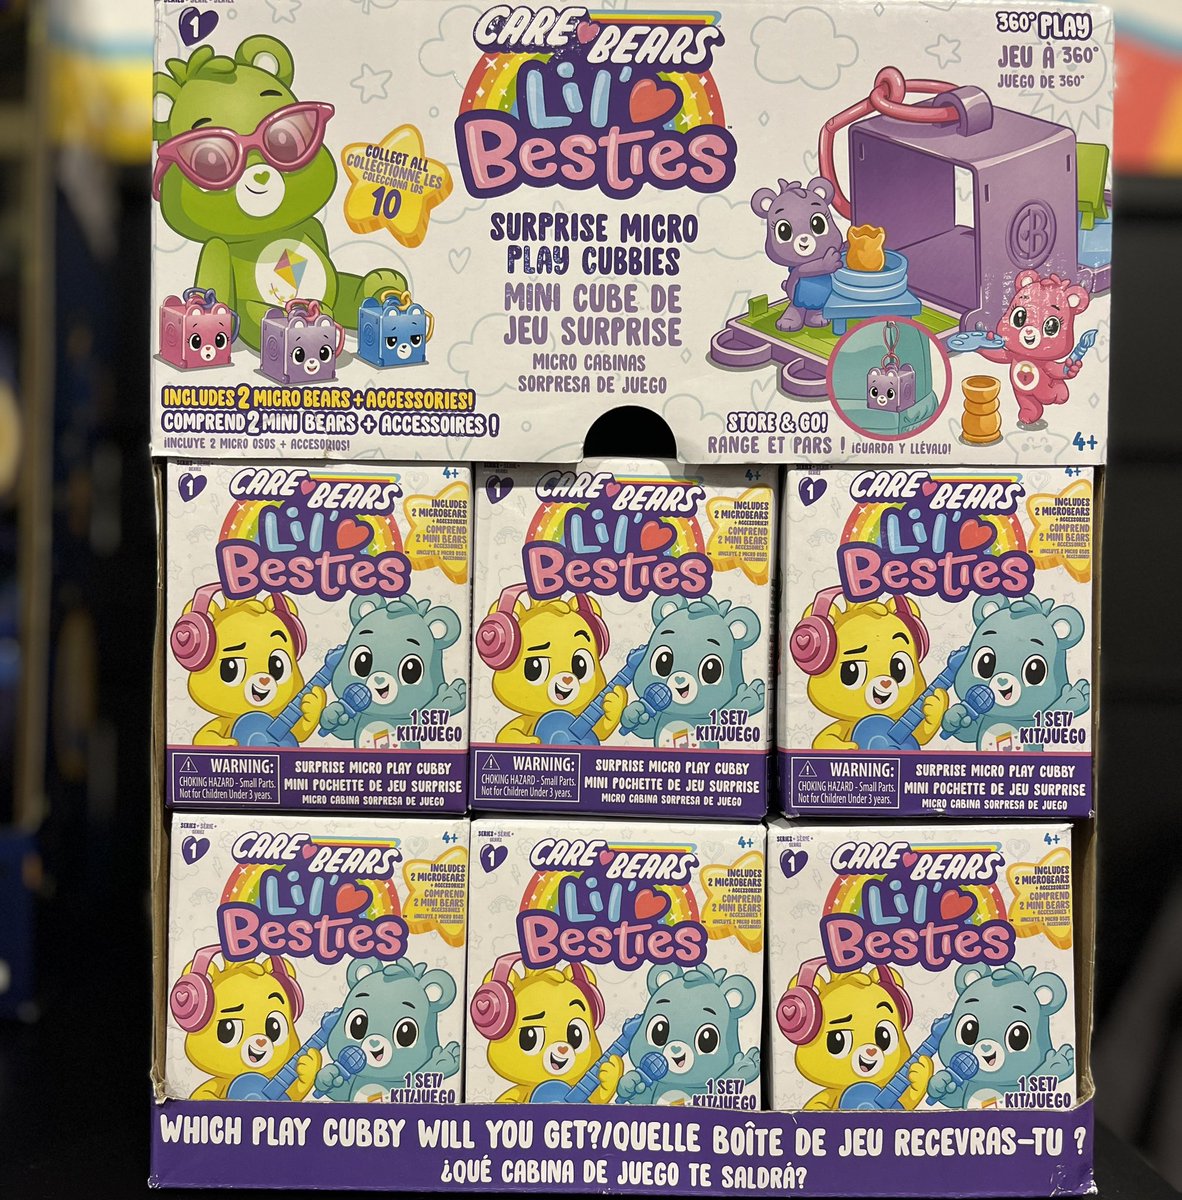 Nobody cares like a bear! Check out the awesome Care Bear range we have in. Prepare to stare. . #hmvLovesPopCulture #Carebears #Pez #Plush #Cute @basicfuntoys